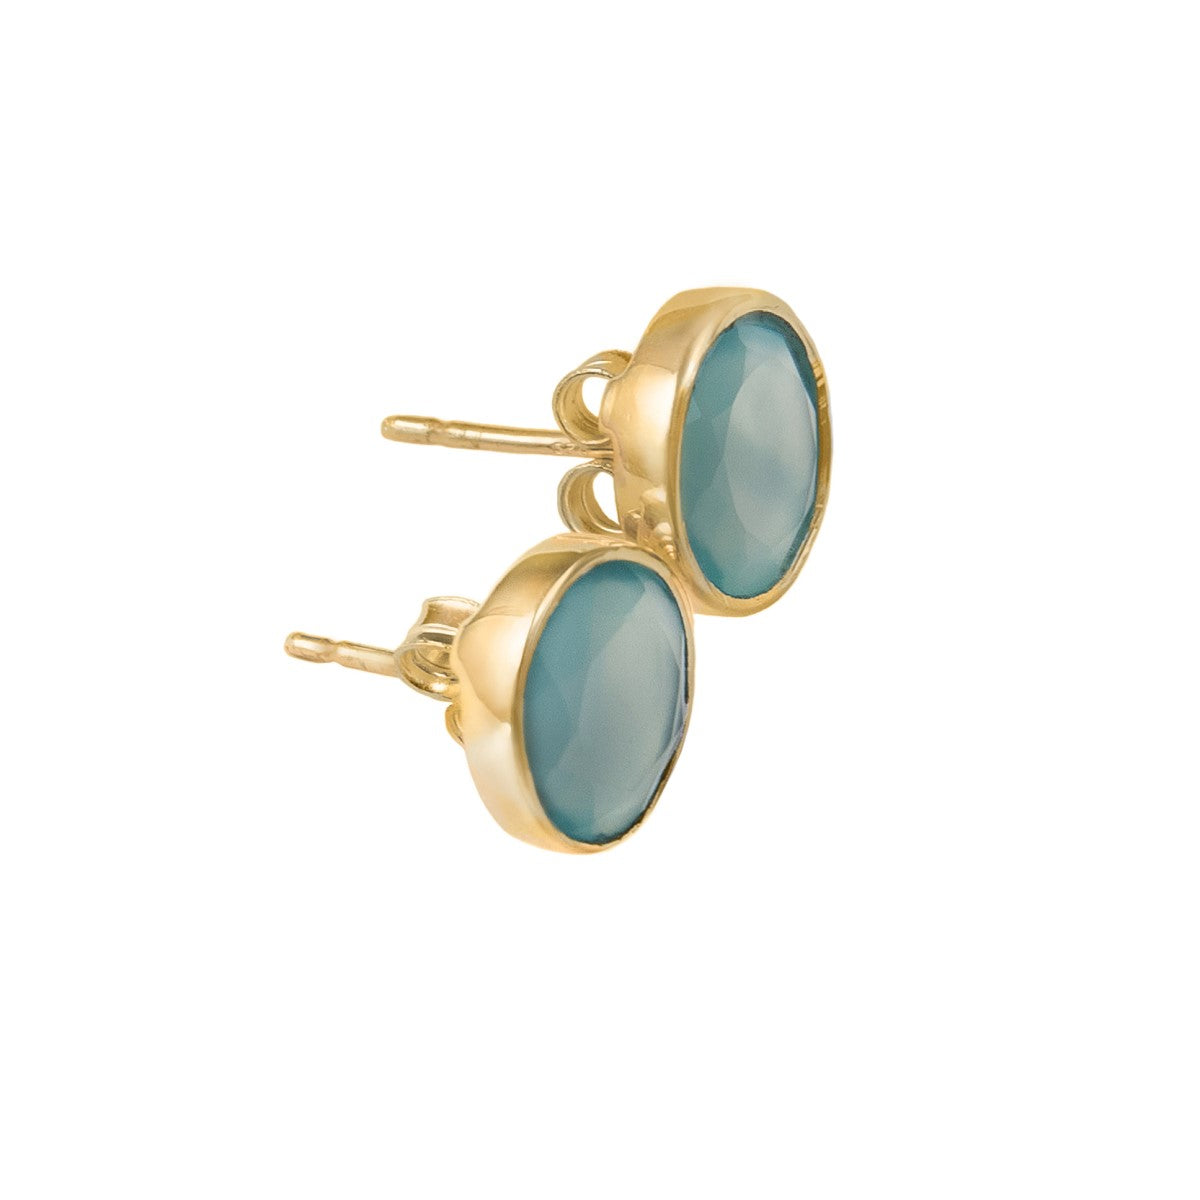 Aqua Chalcedony Studs in Gold Plated Sterling Silver with a Round Faceted Gemstone